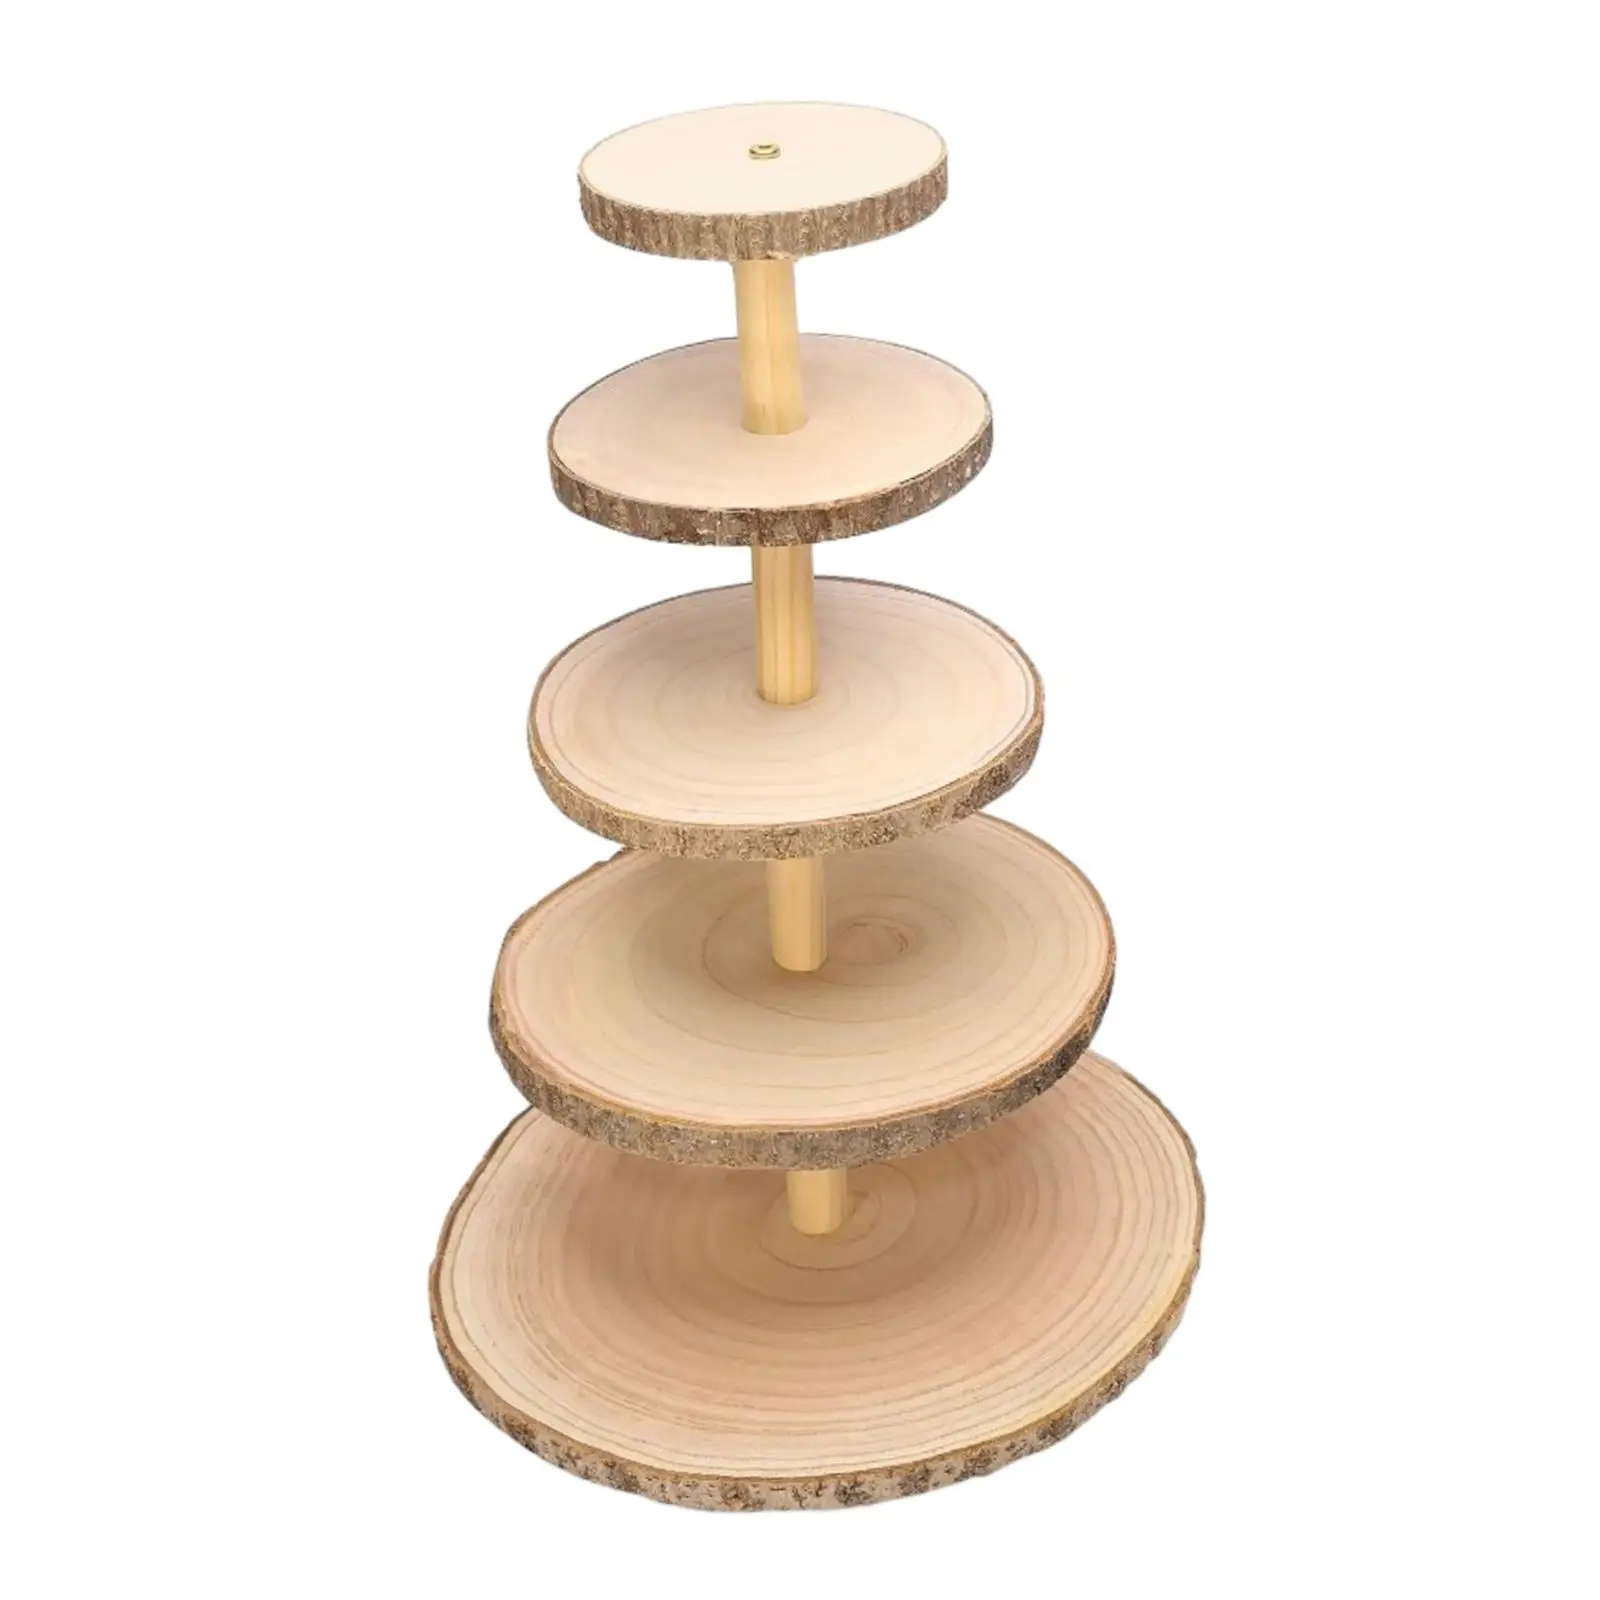 Wood Cupcake Stand Rustic Wood Cake Stand Dessert Display Stand Four Tiered for Table Centerpiece Parties Home Birthday Decor